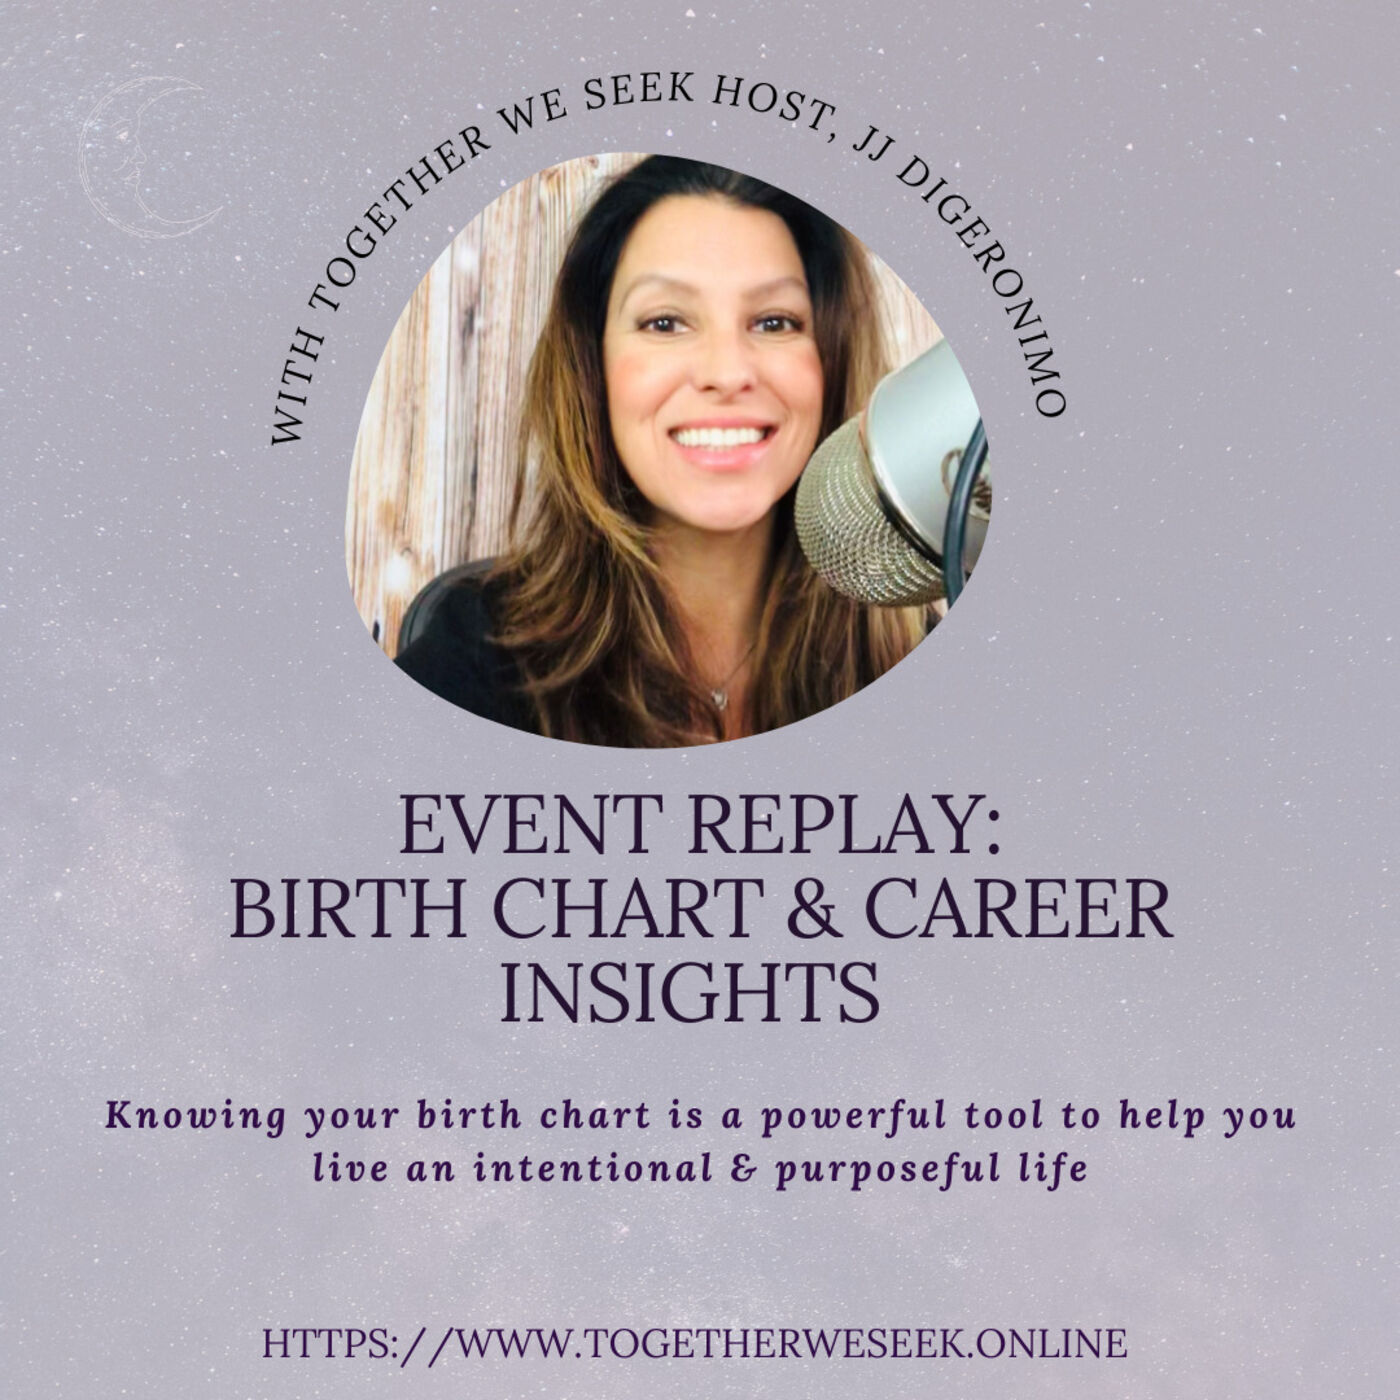 What Are Birth Charts & How Can They Share Career Insights!